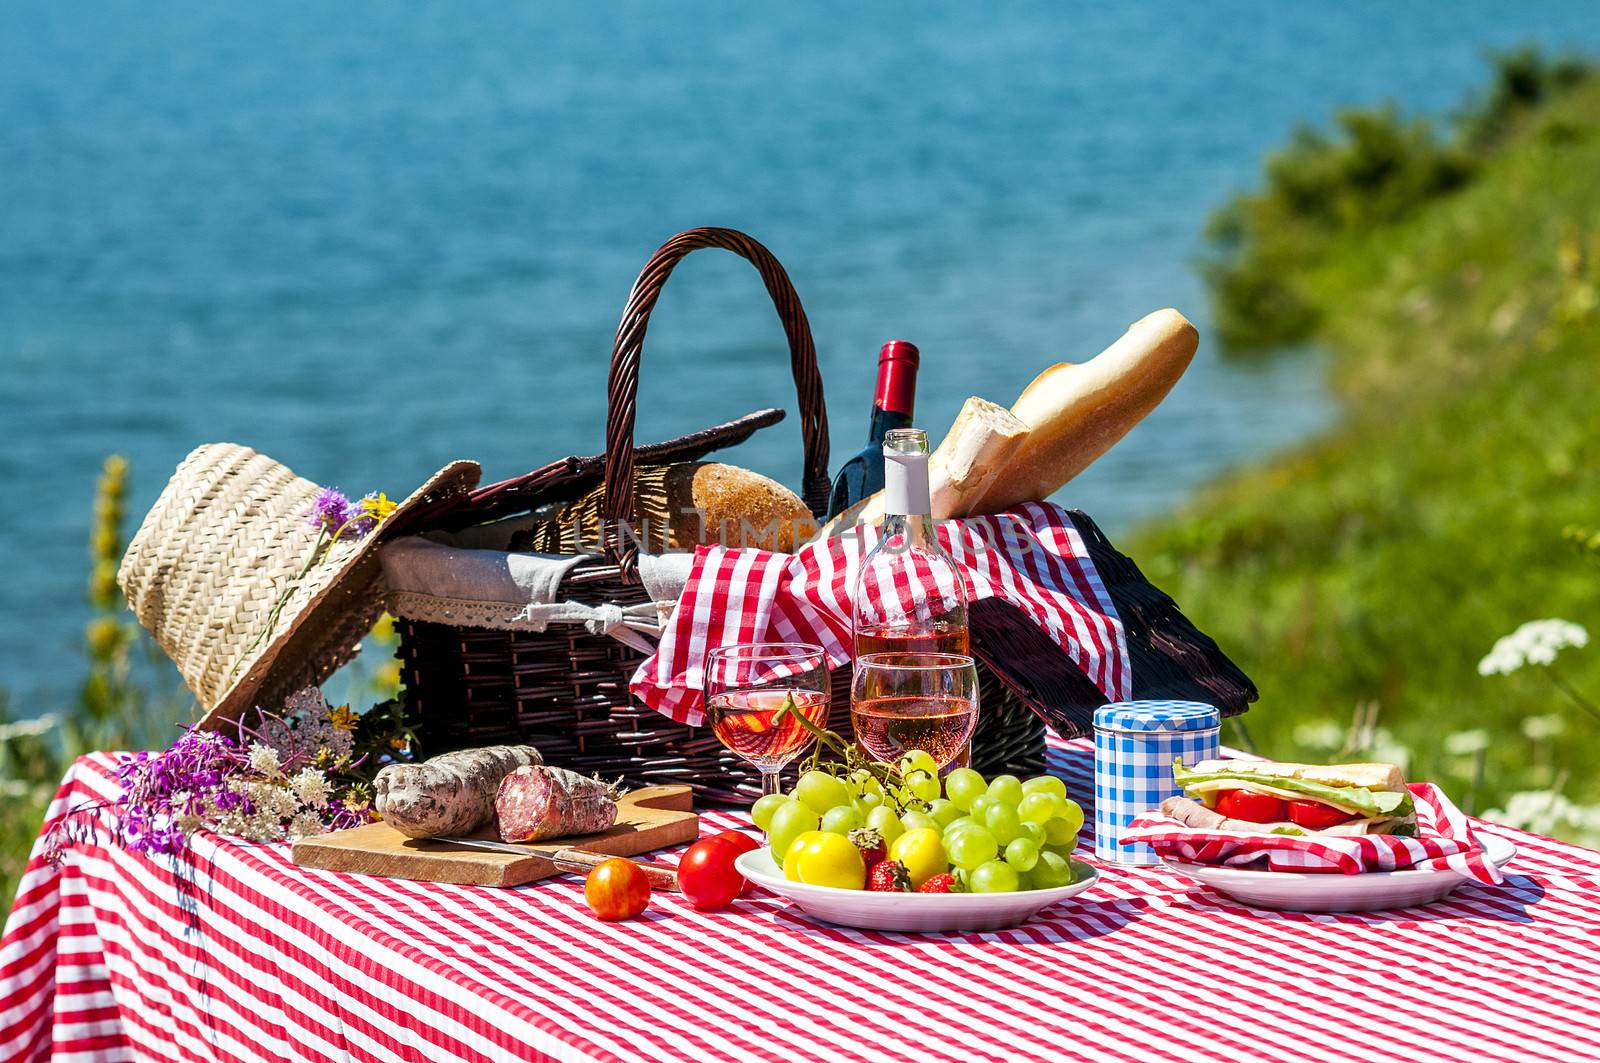 tasted picnic on the grass near a lake